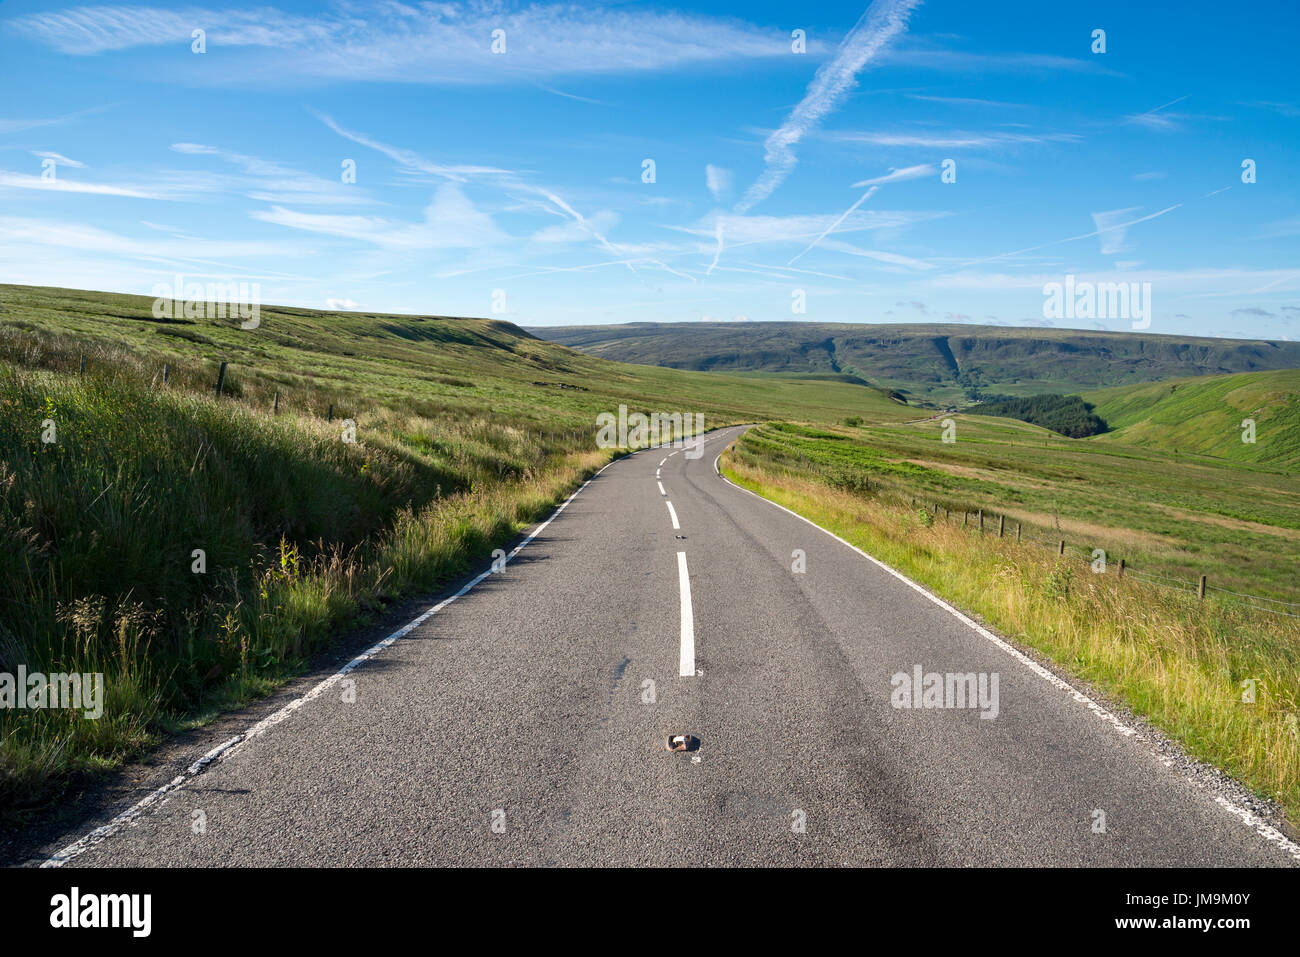 The A6024 Woodhead road over the Pennines on the border of Derbyshire and West Yorkshire. Stock Photo